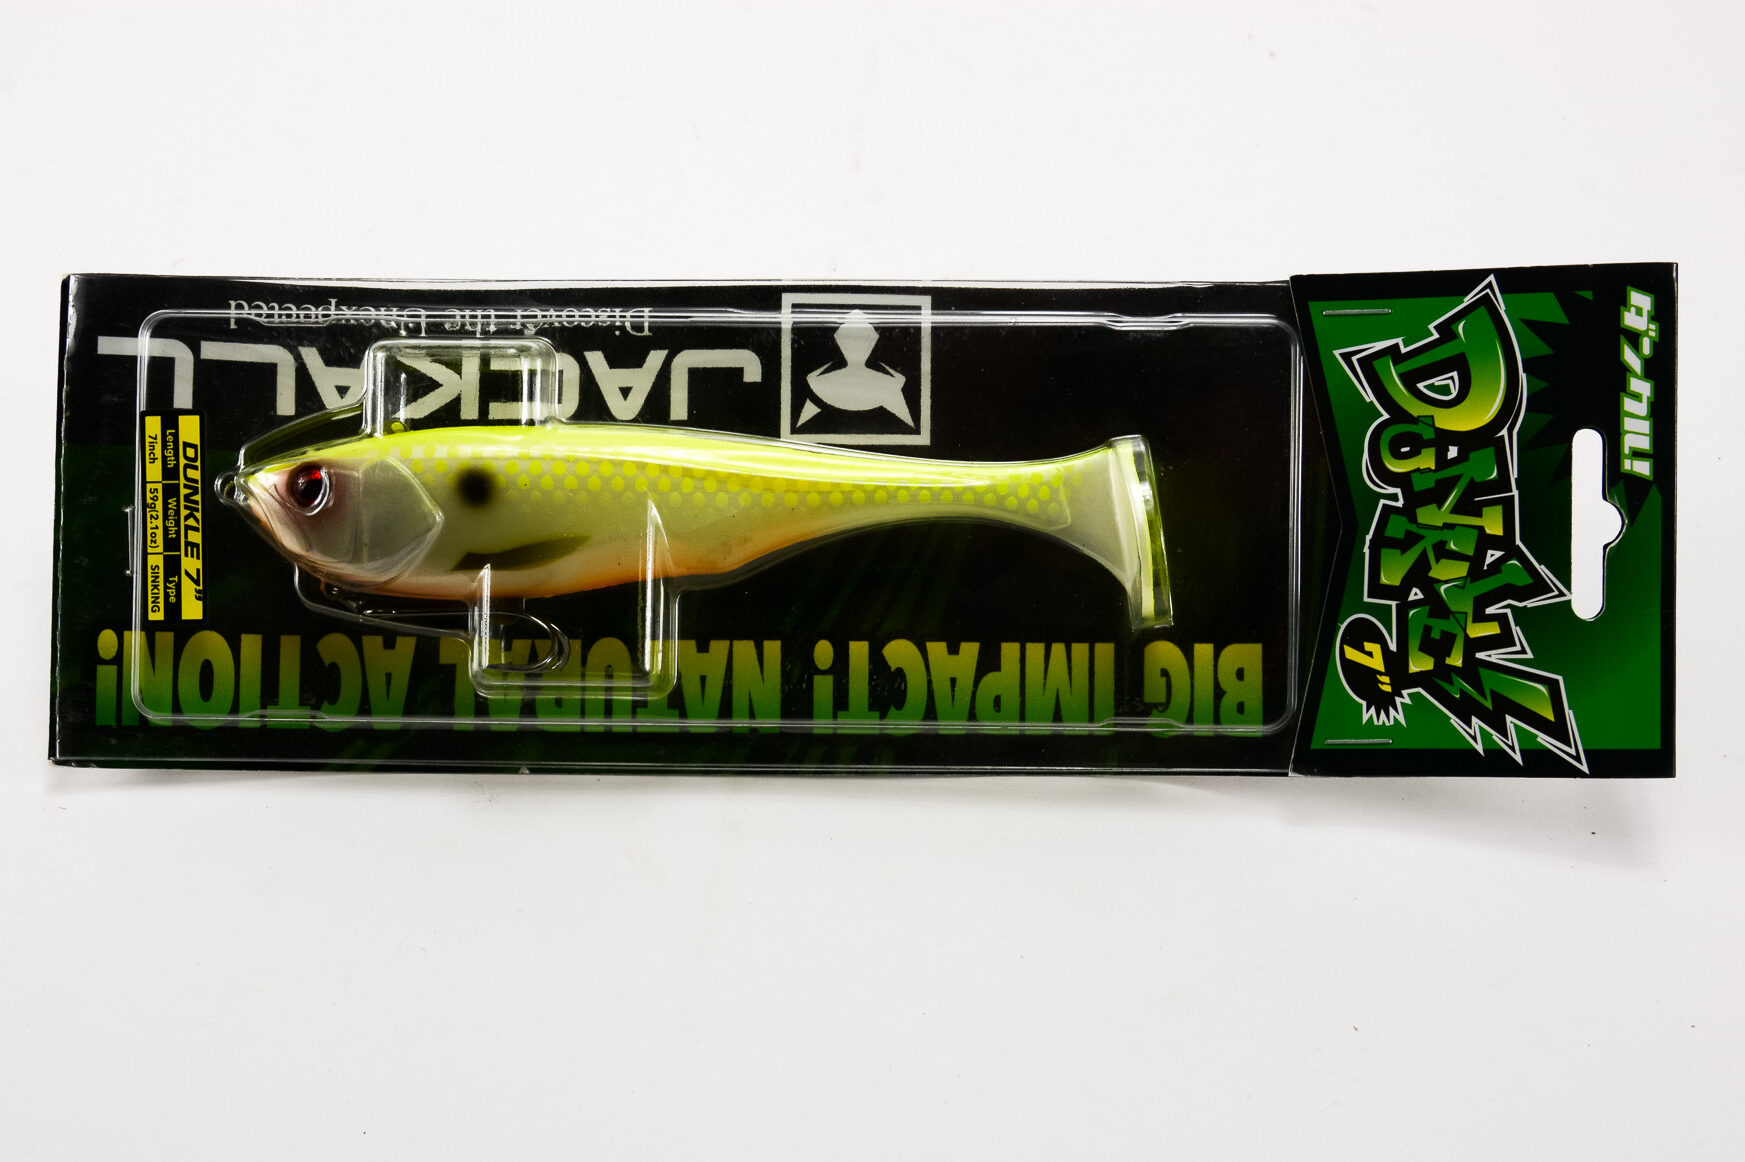 22cm 53g Blank Lizard Fishing Lures Floating Unpainted Multi Jointed  Swimbait Clear Body Bass Bait Fishing Tackle